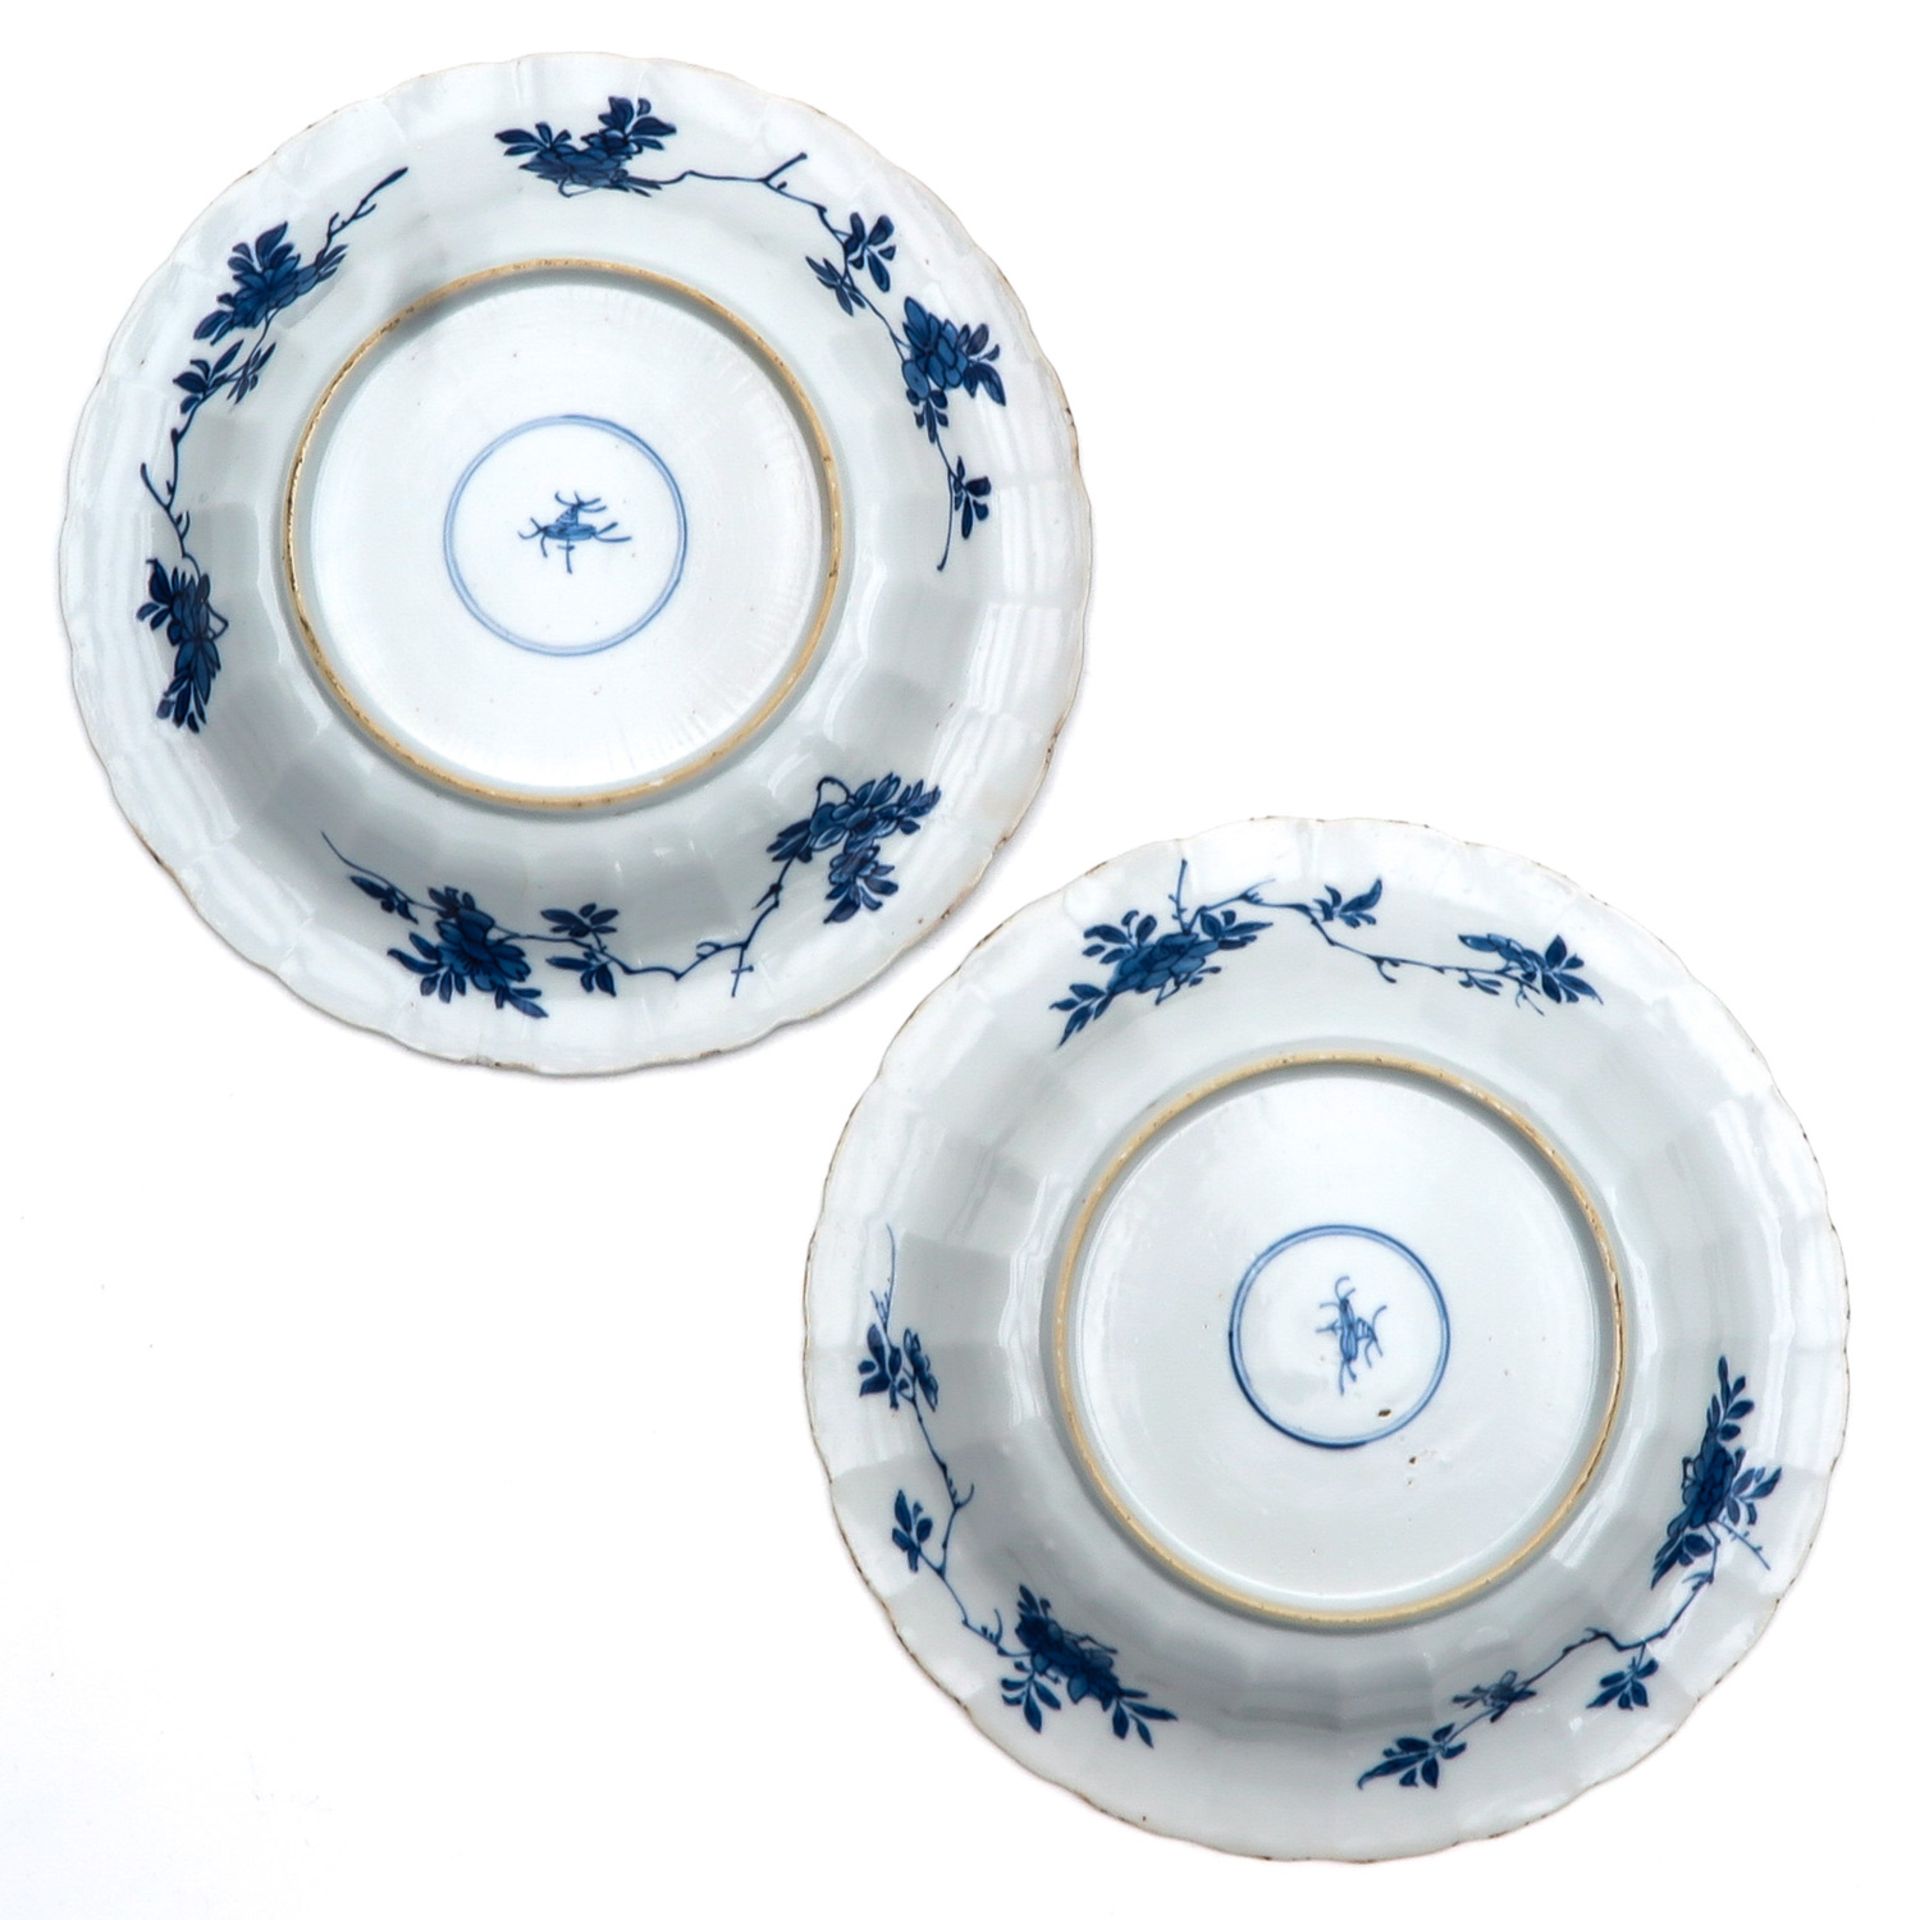 A Series of 4 Blue and White Plates - Image 6 of 9